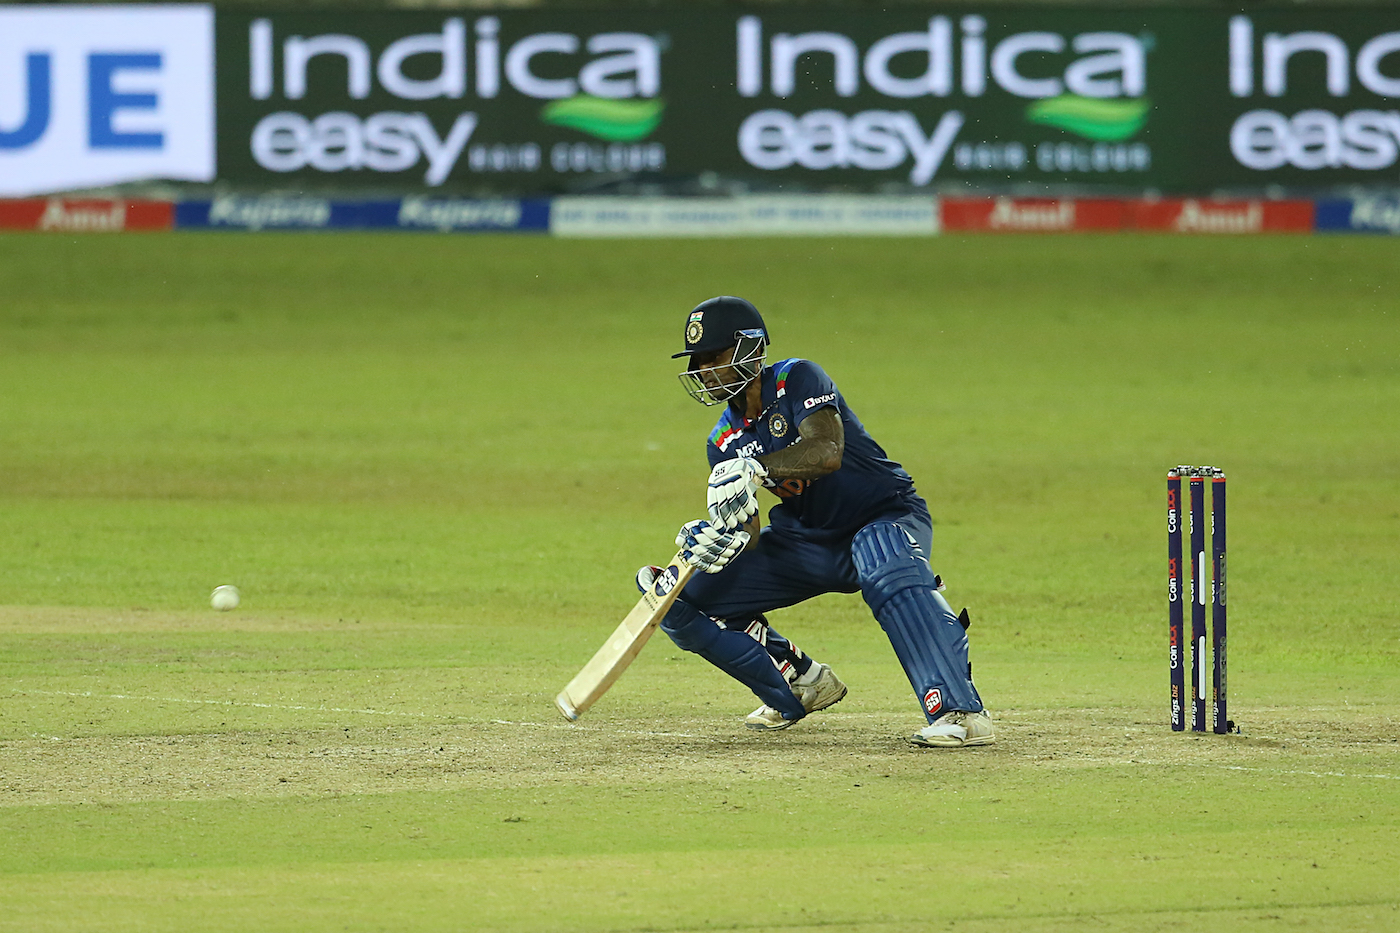 Suryakumar Yadav was the hero with the bat in first T20I | AFP